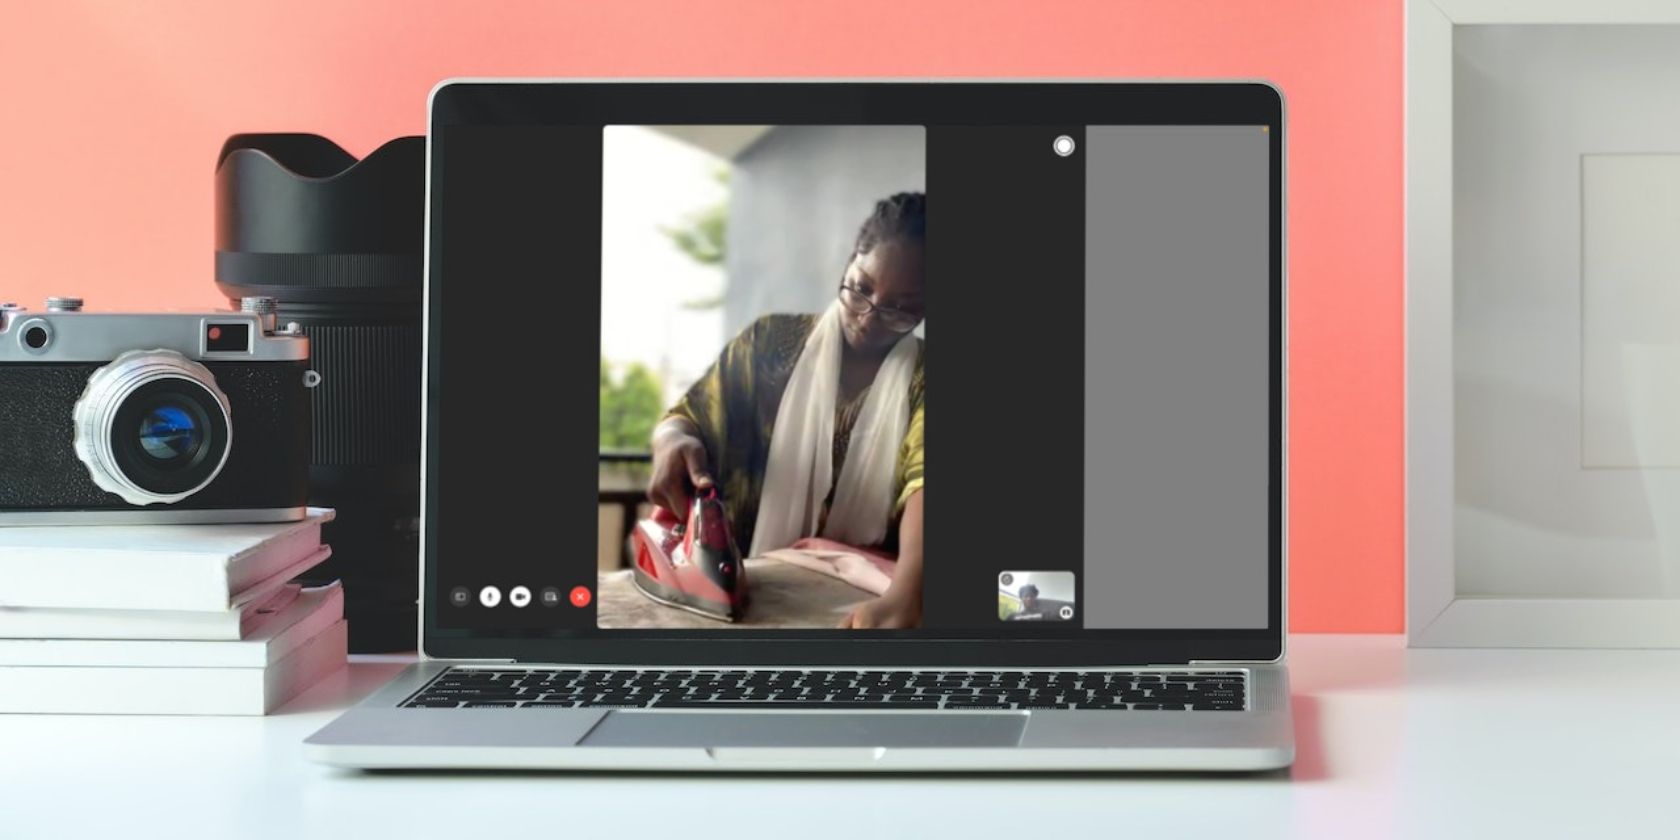 FaceTime call on a MacBook next to a camera